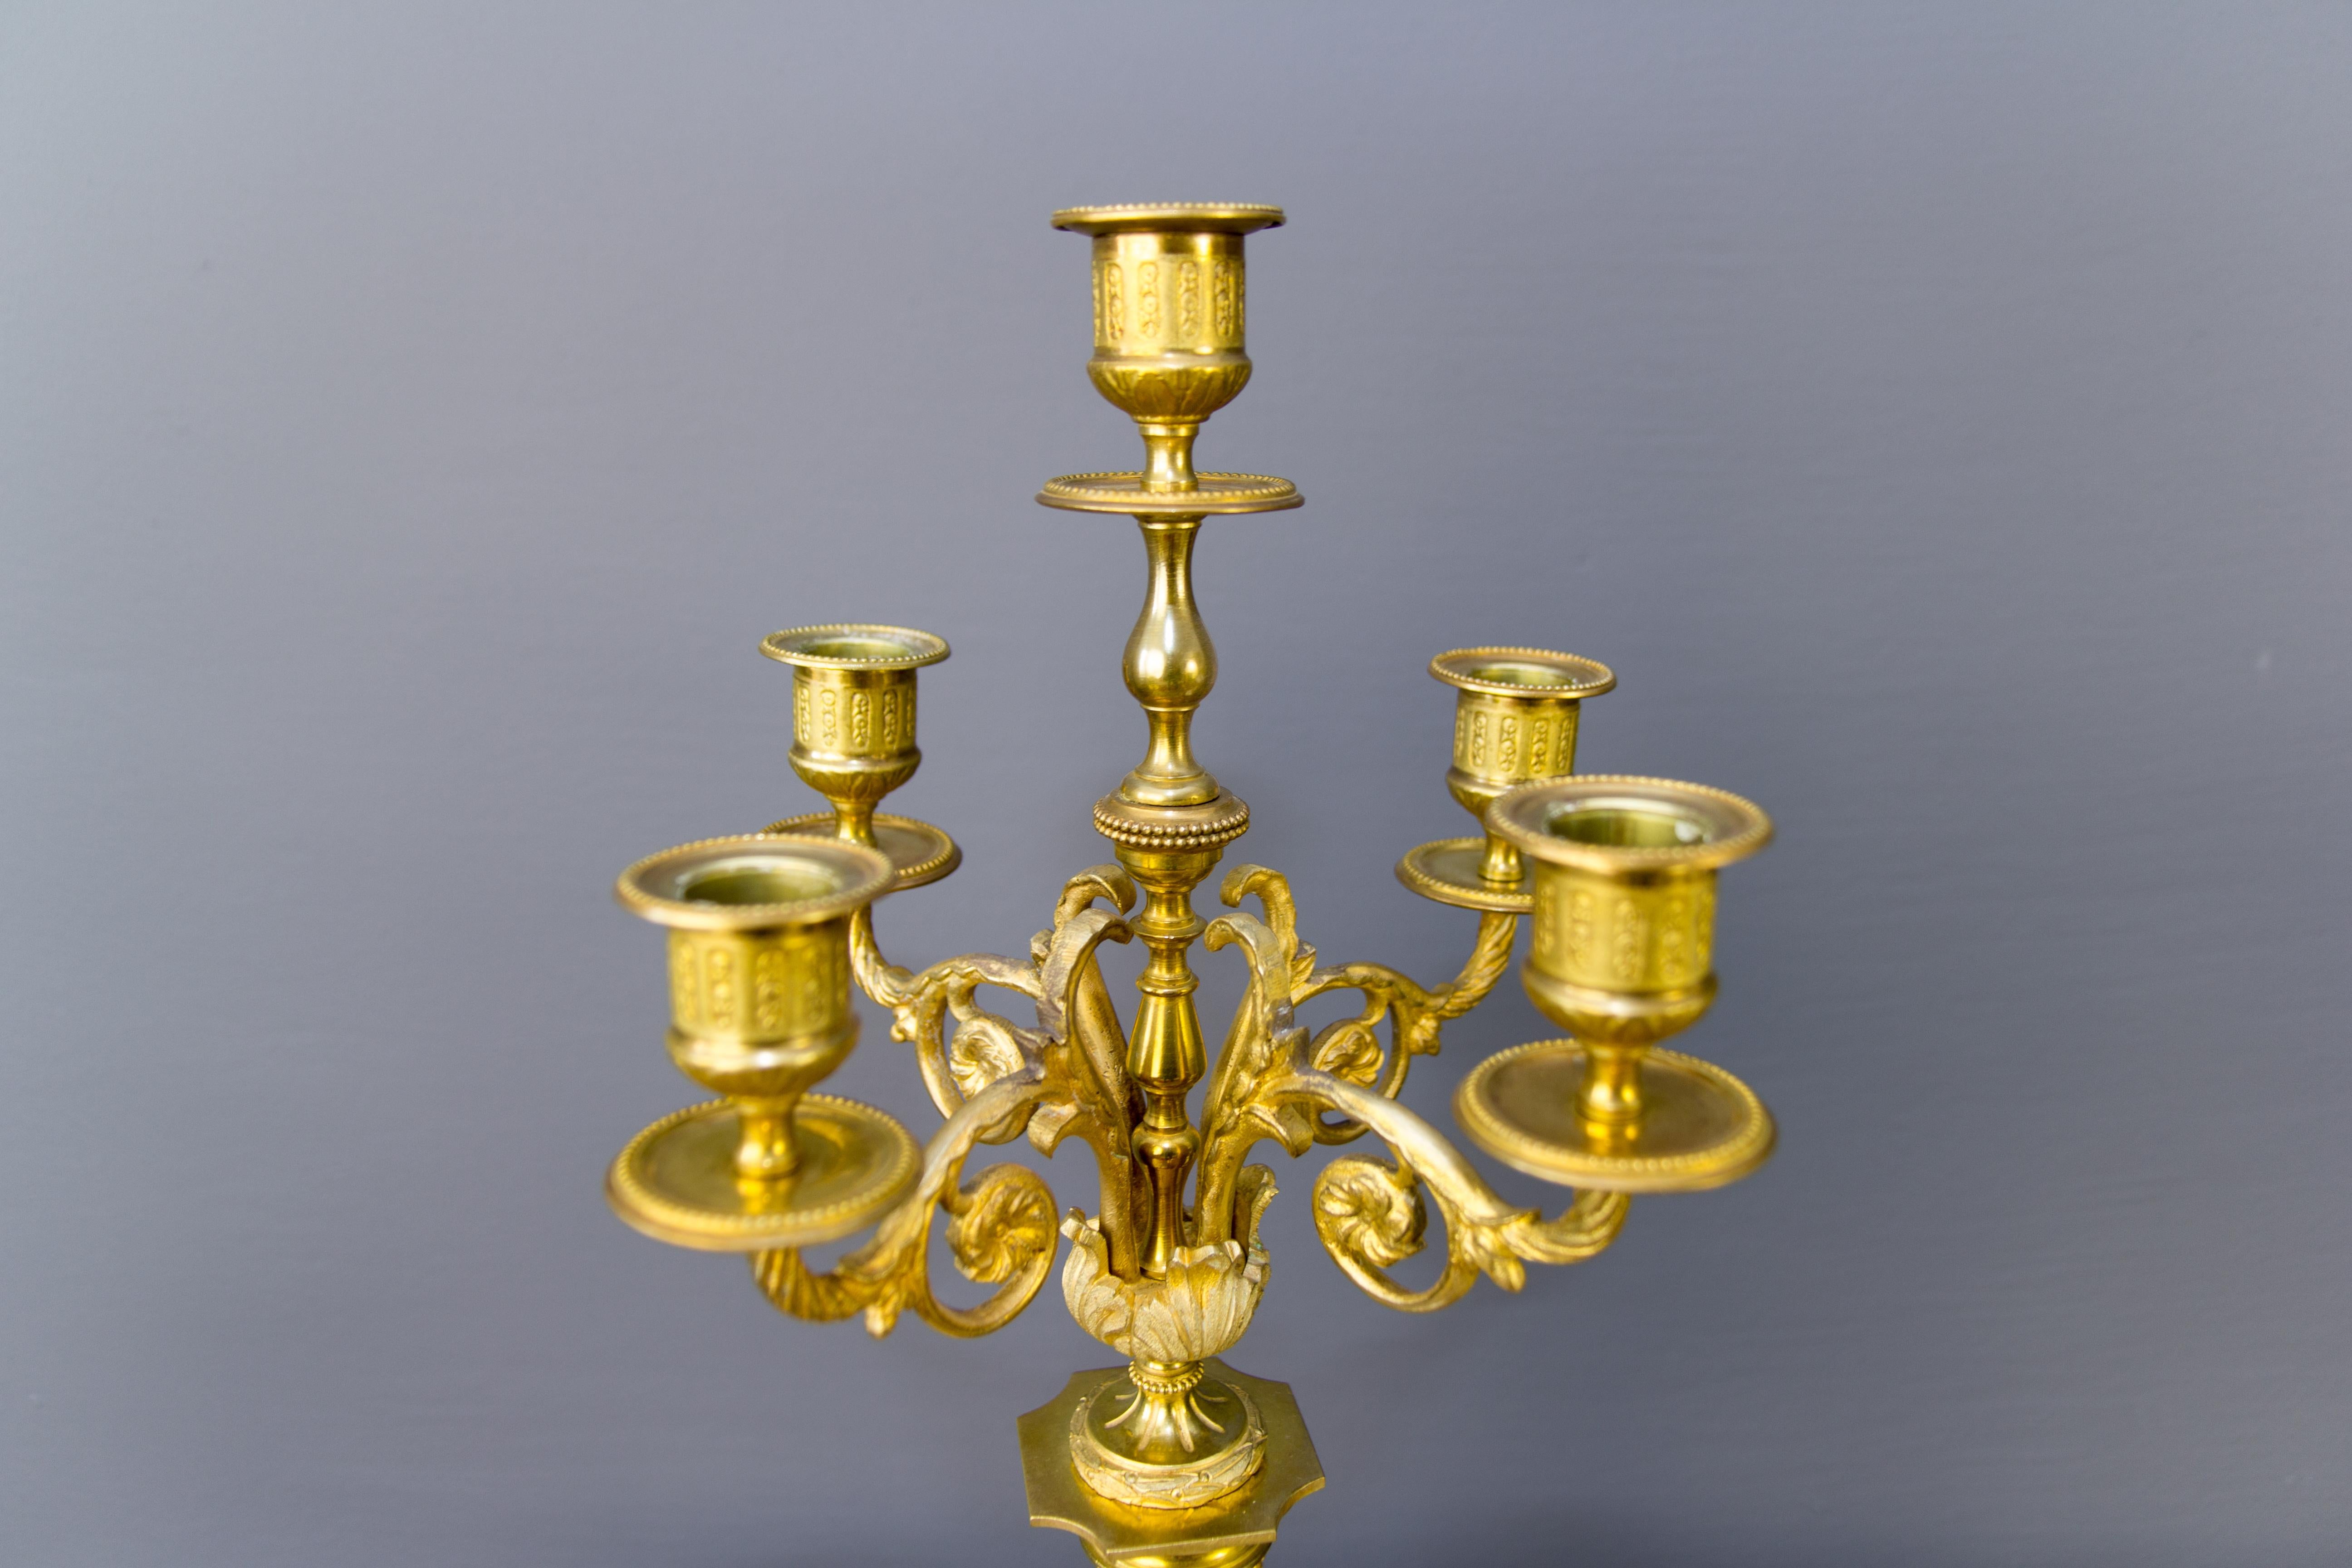 Gilt French Ormolu and White Marble Mantel Clock and Candelabra Set by A.D. Mougin